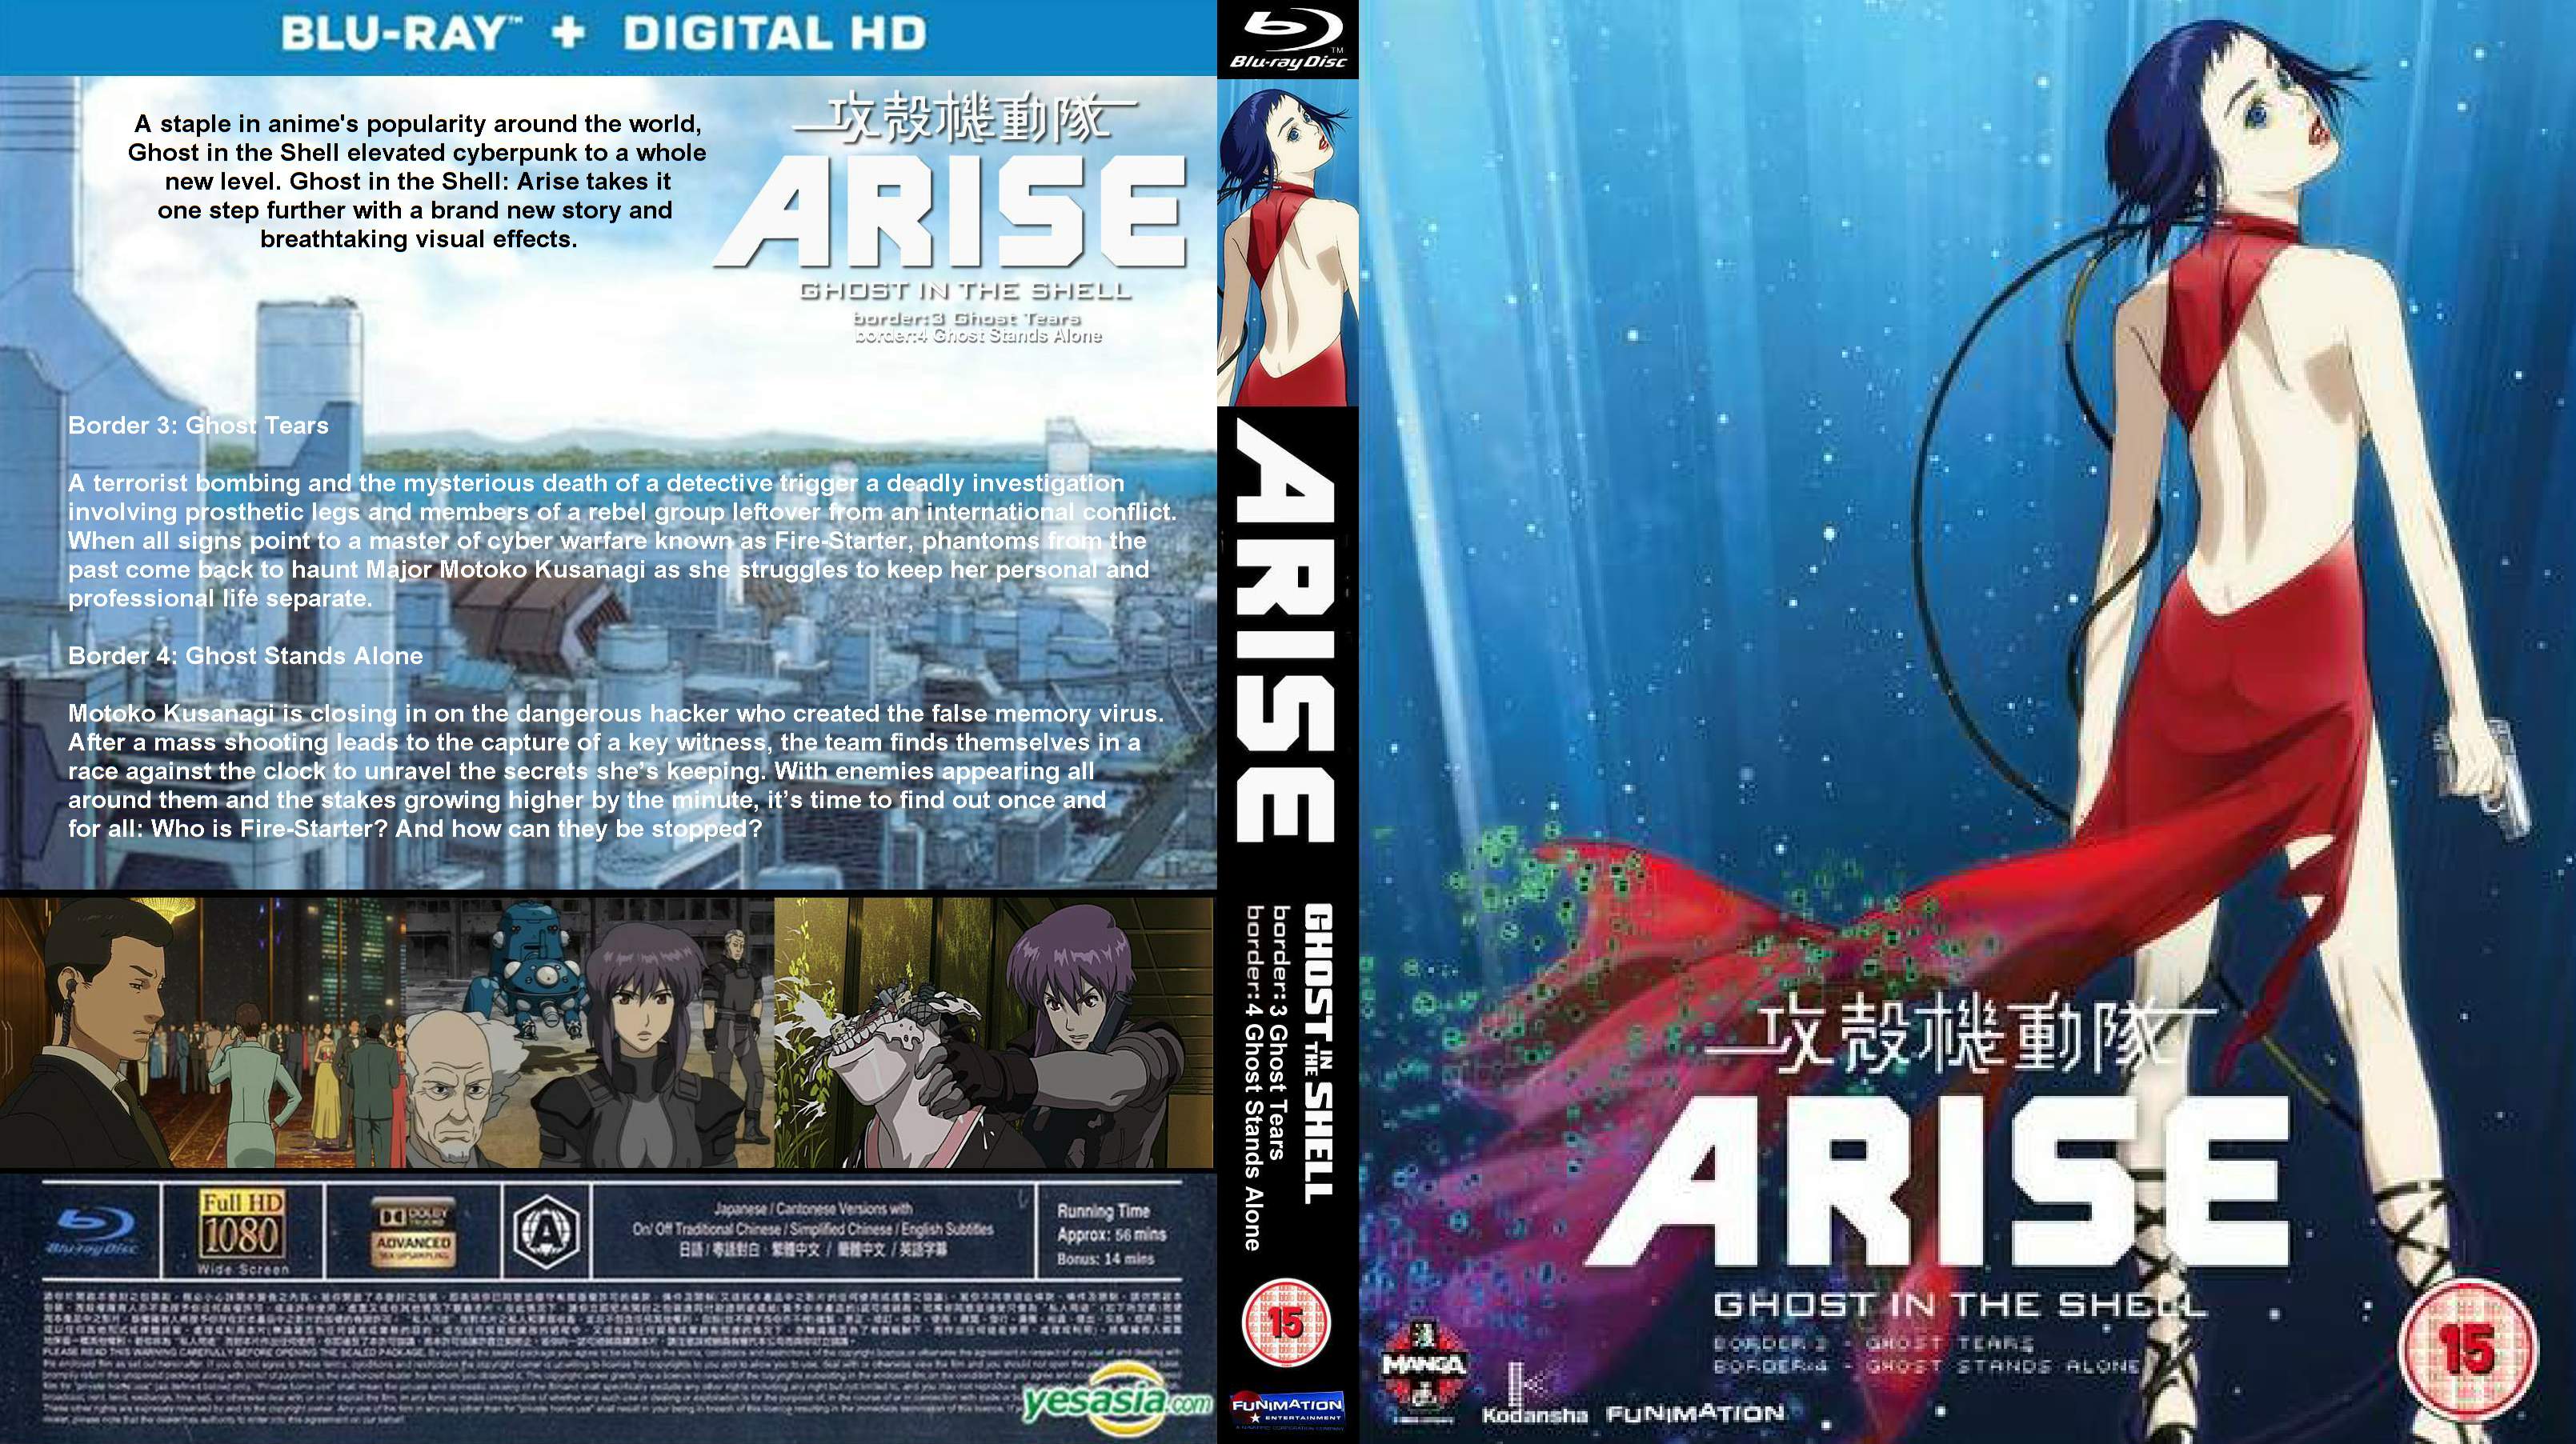 Covers Box Sk Ghost In The Shell Arise Border 14 3 4 High Quality Dvd Blueray Movie